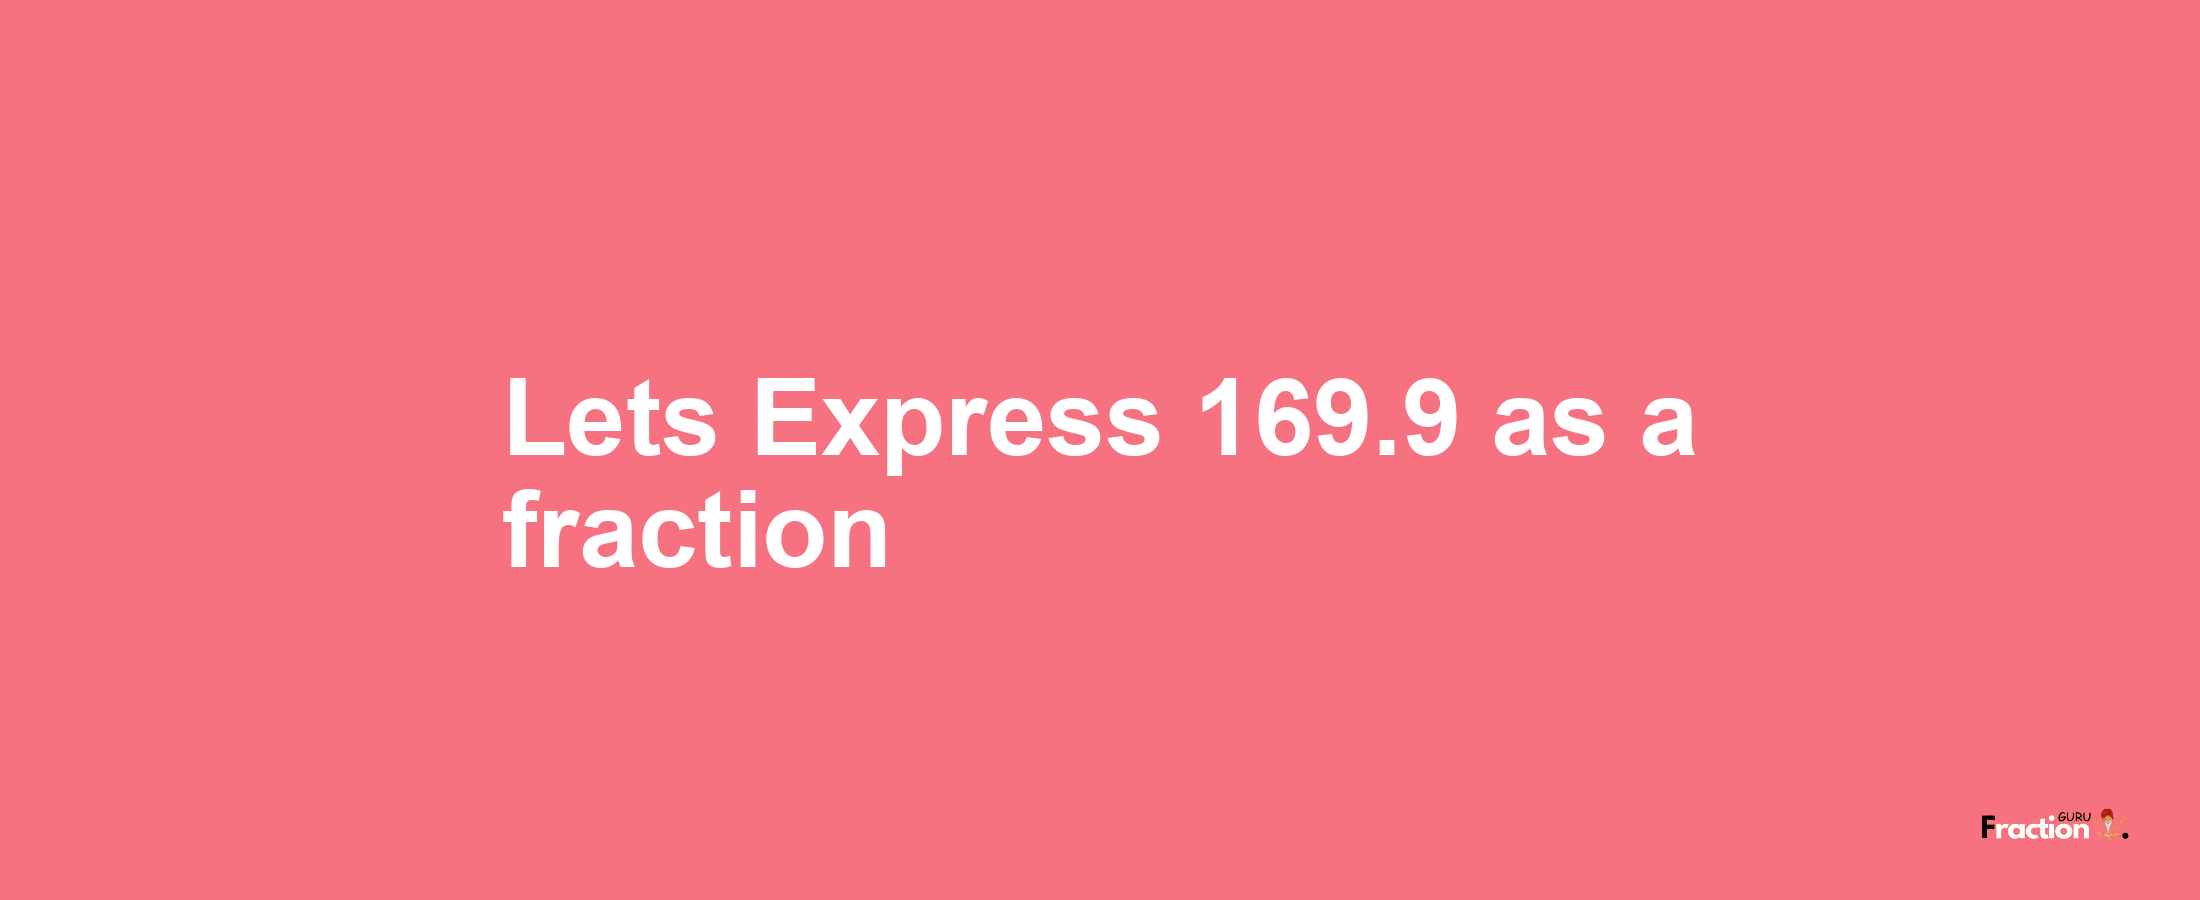 Lets Express 169.9 as afraction